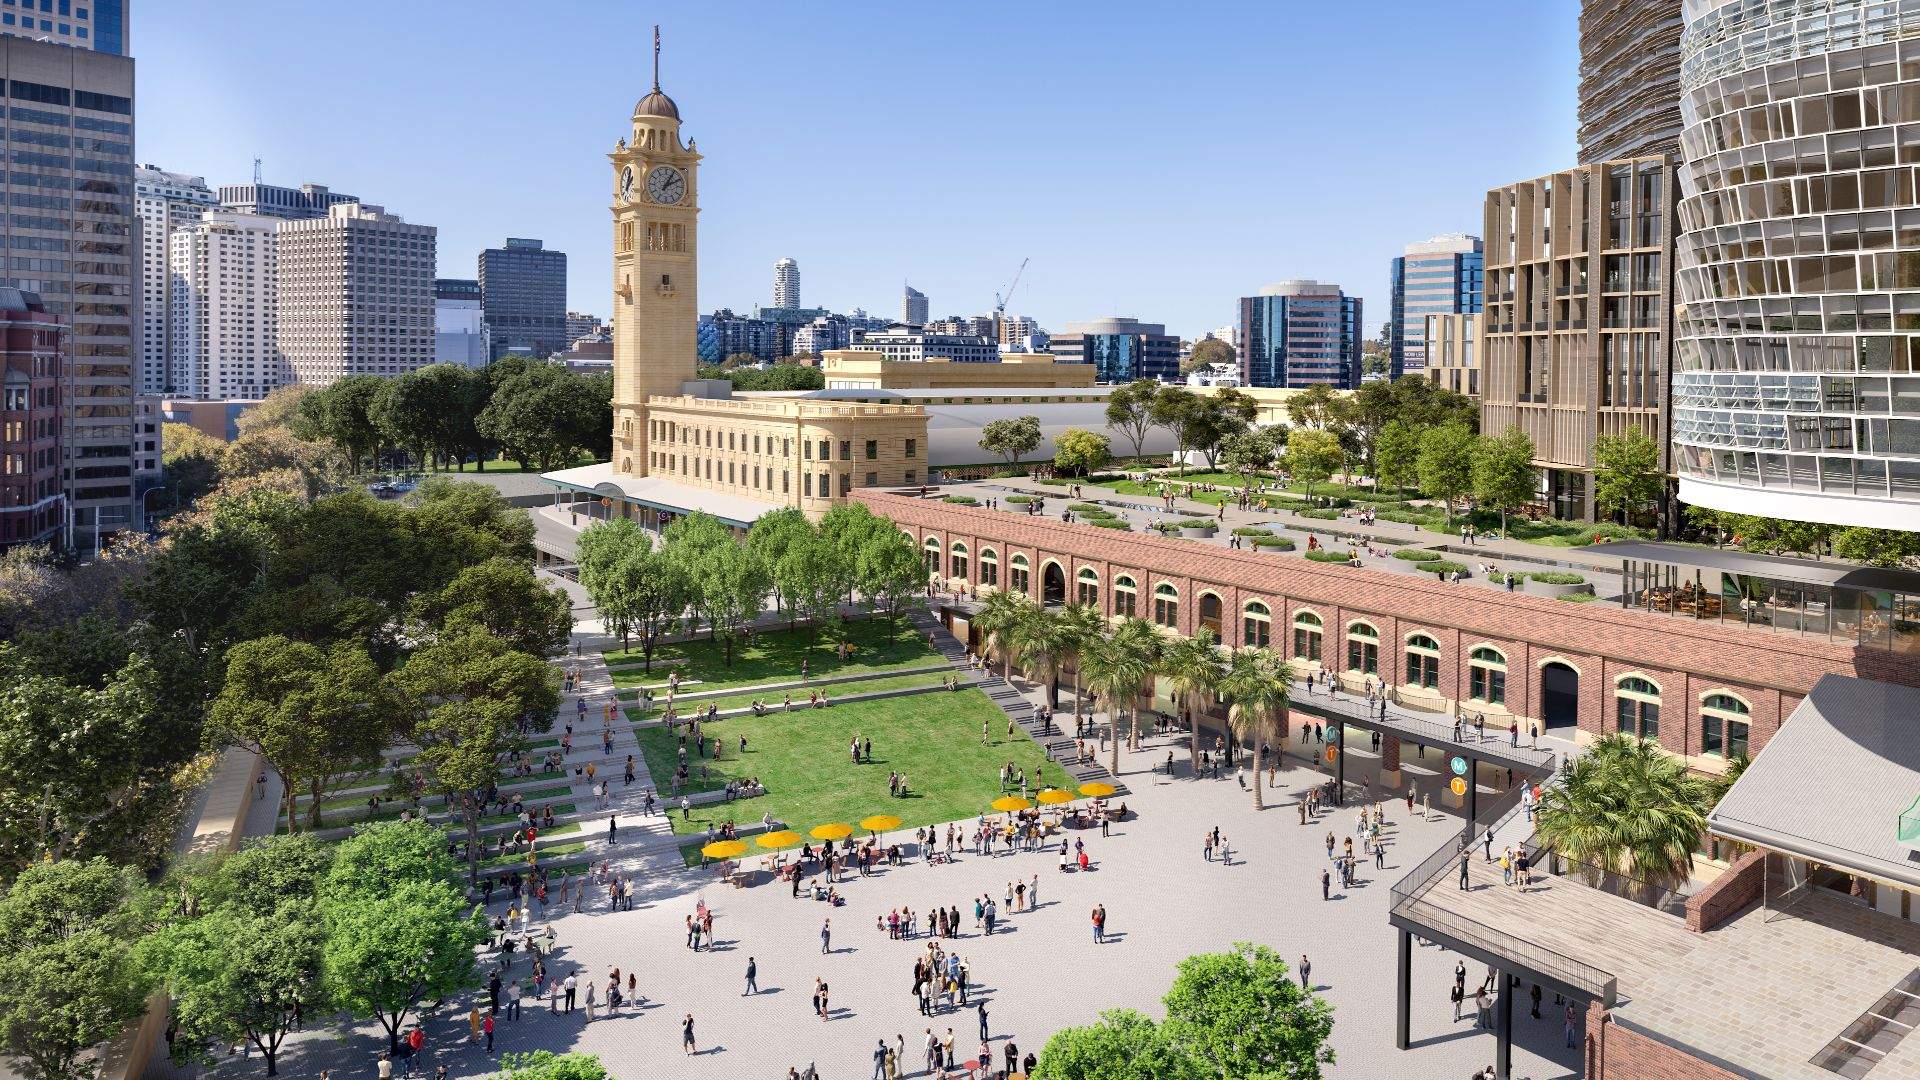 The NSW Government Has Unveiled a Plan to Upgrade Central Station with Parks, Restaurants, Shops and Affordable Housing